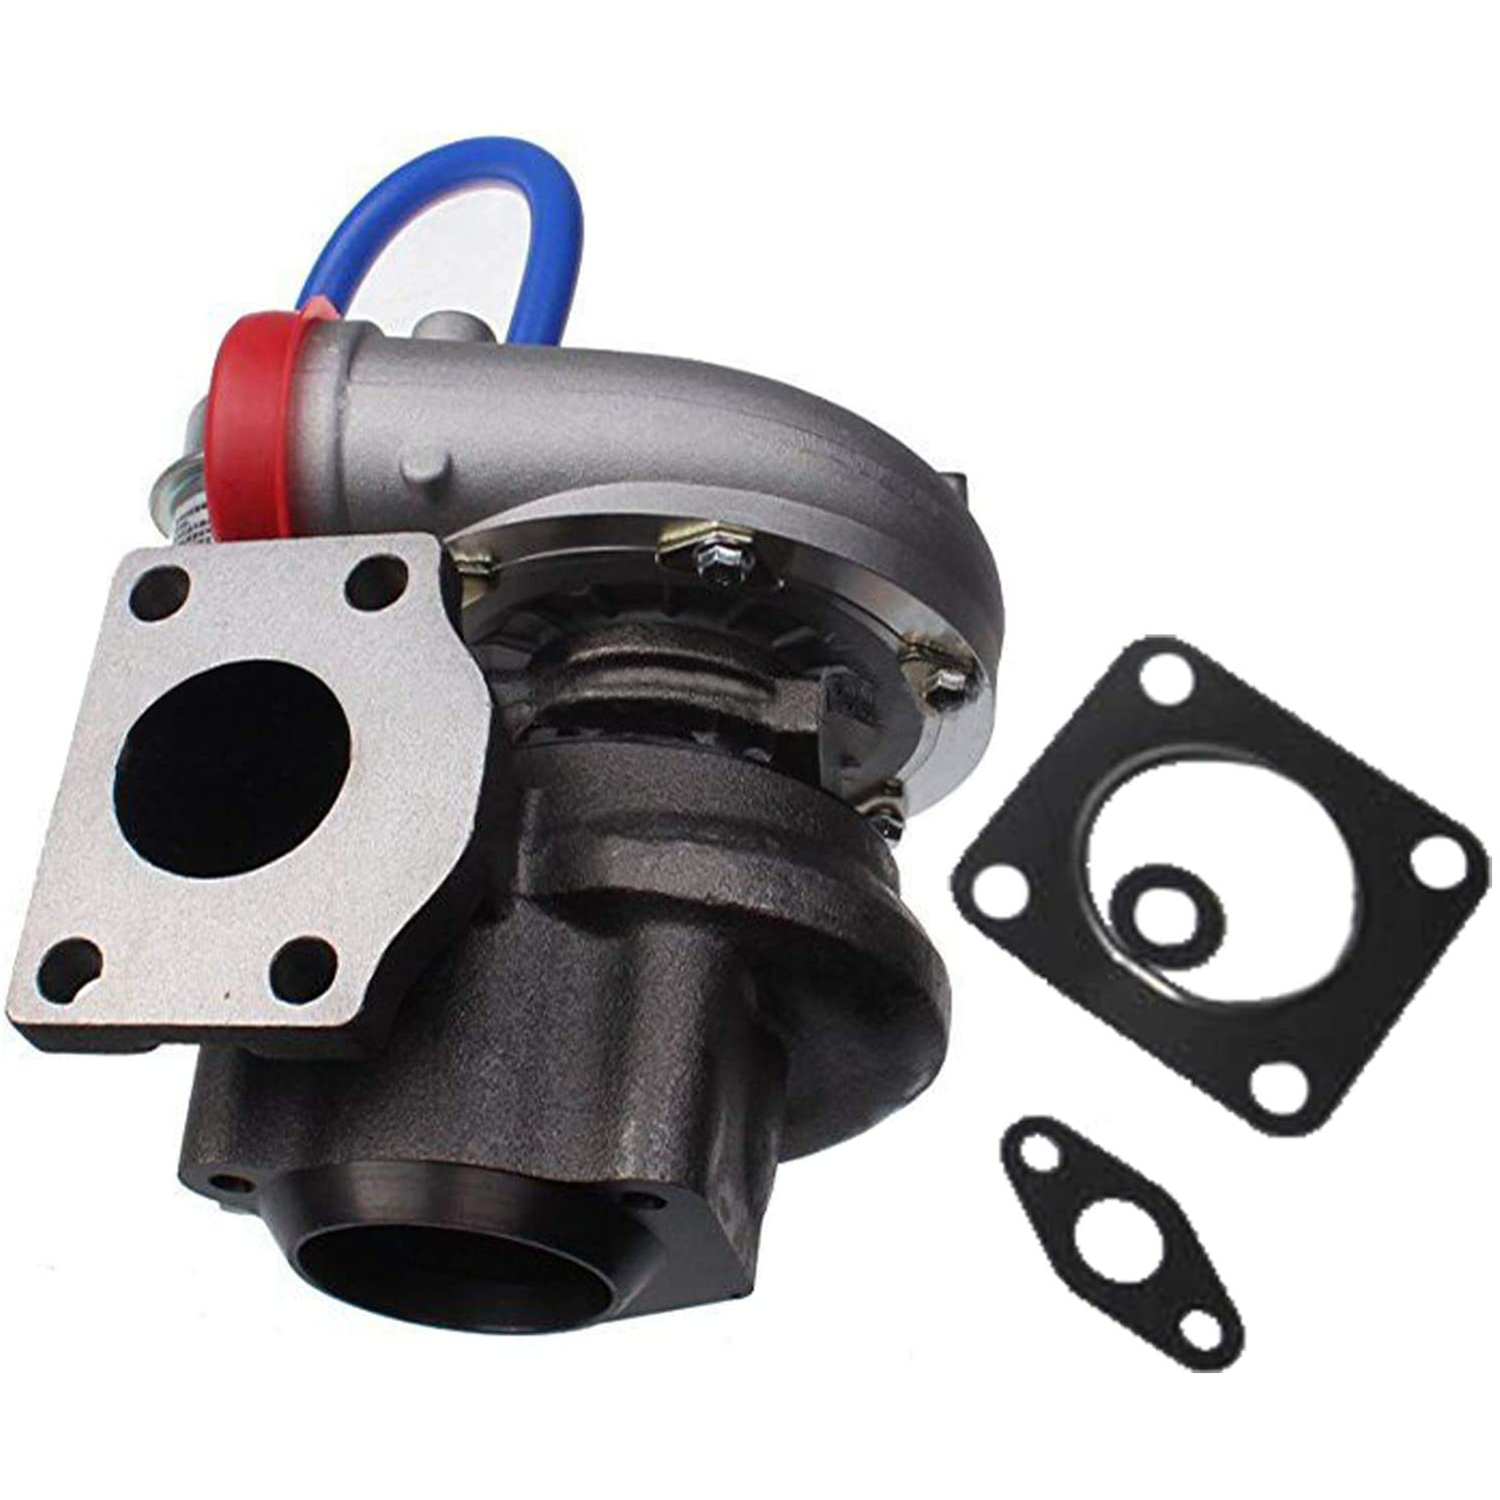 GT2052 Turbo 2674A093 452191-5001S Fit for Perkins Industrial Engine T4.40 - KUDUPARTS